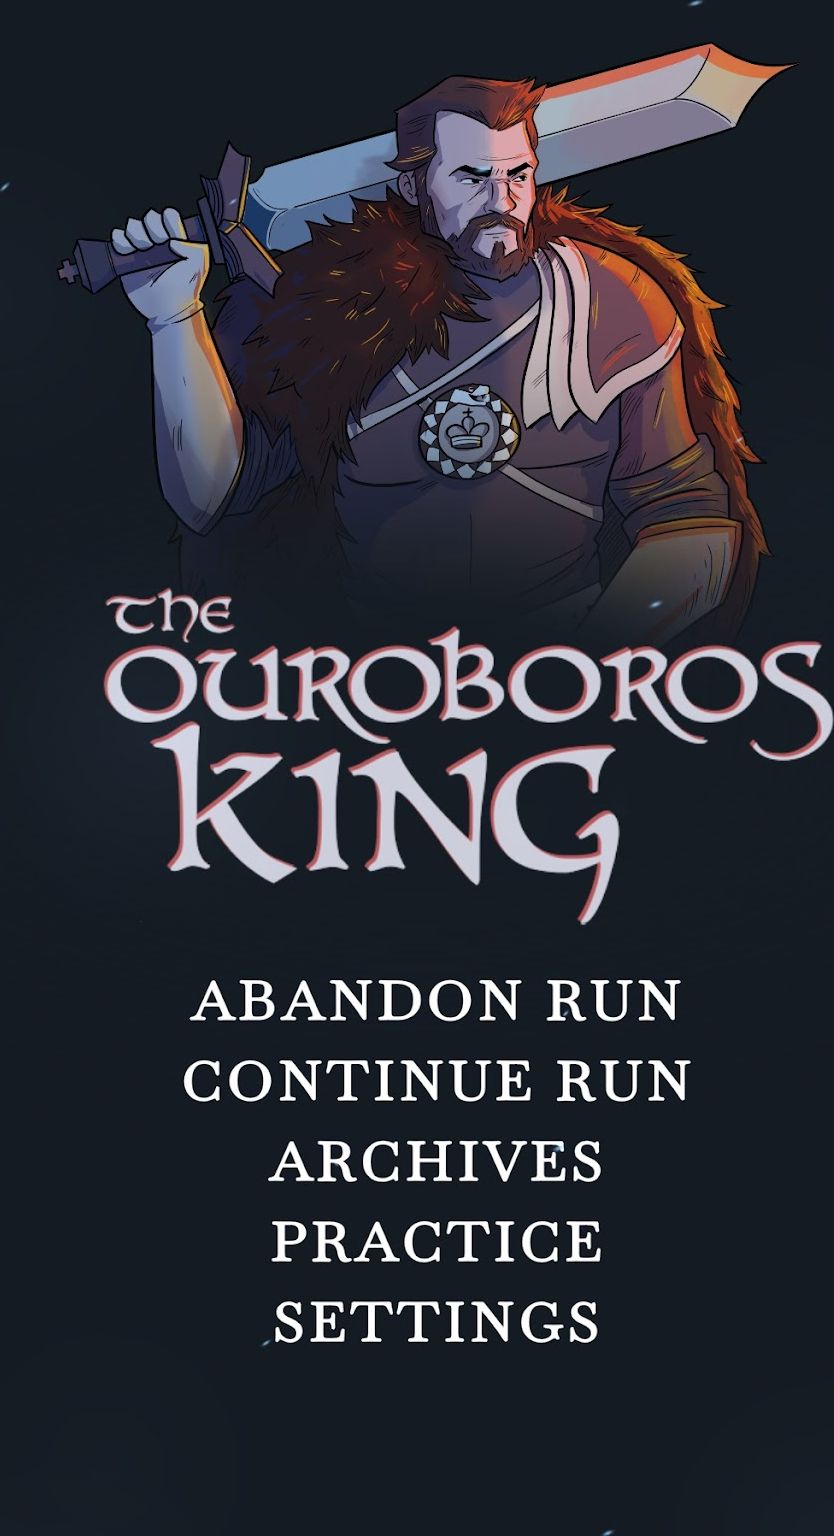 Scarica Ouroboros King Chess Roguelike gratis per Android.